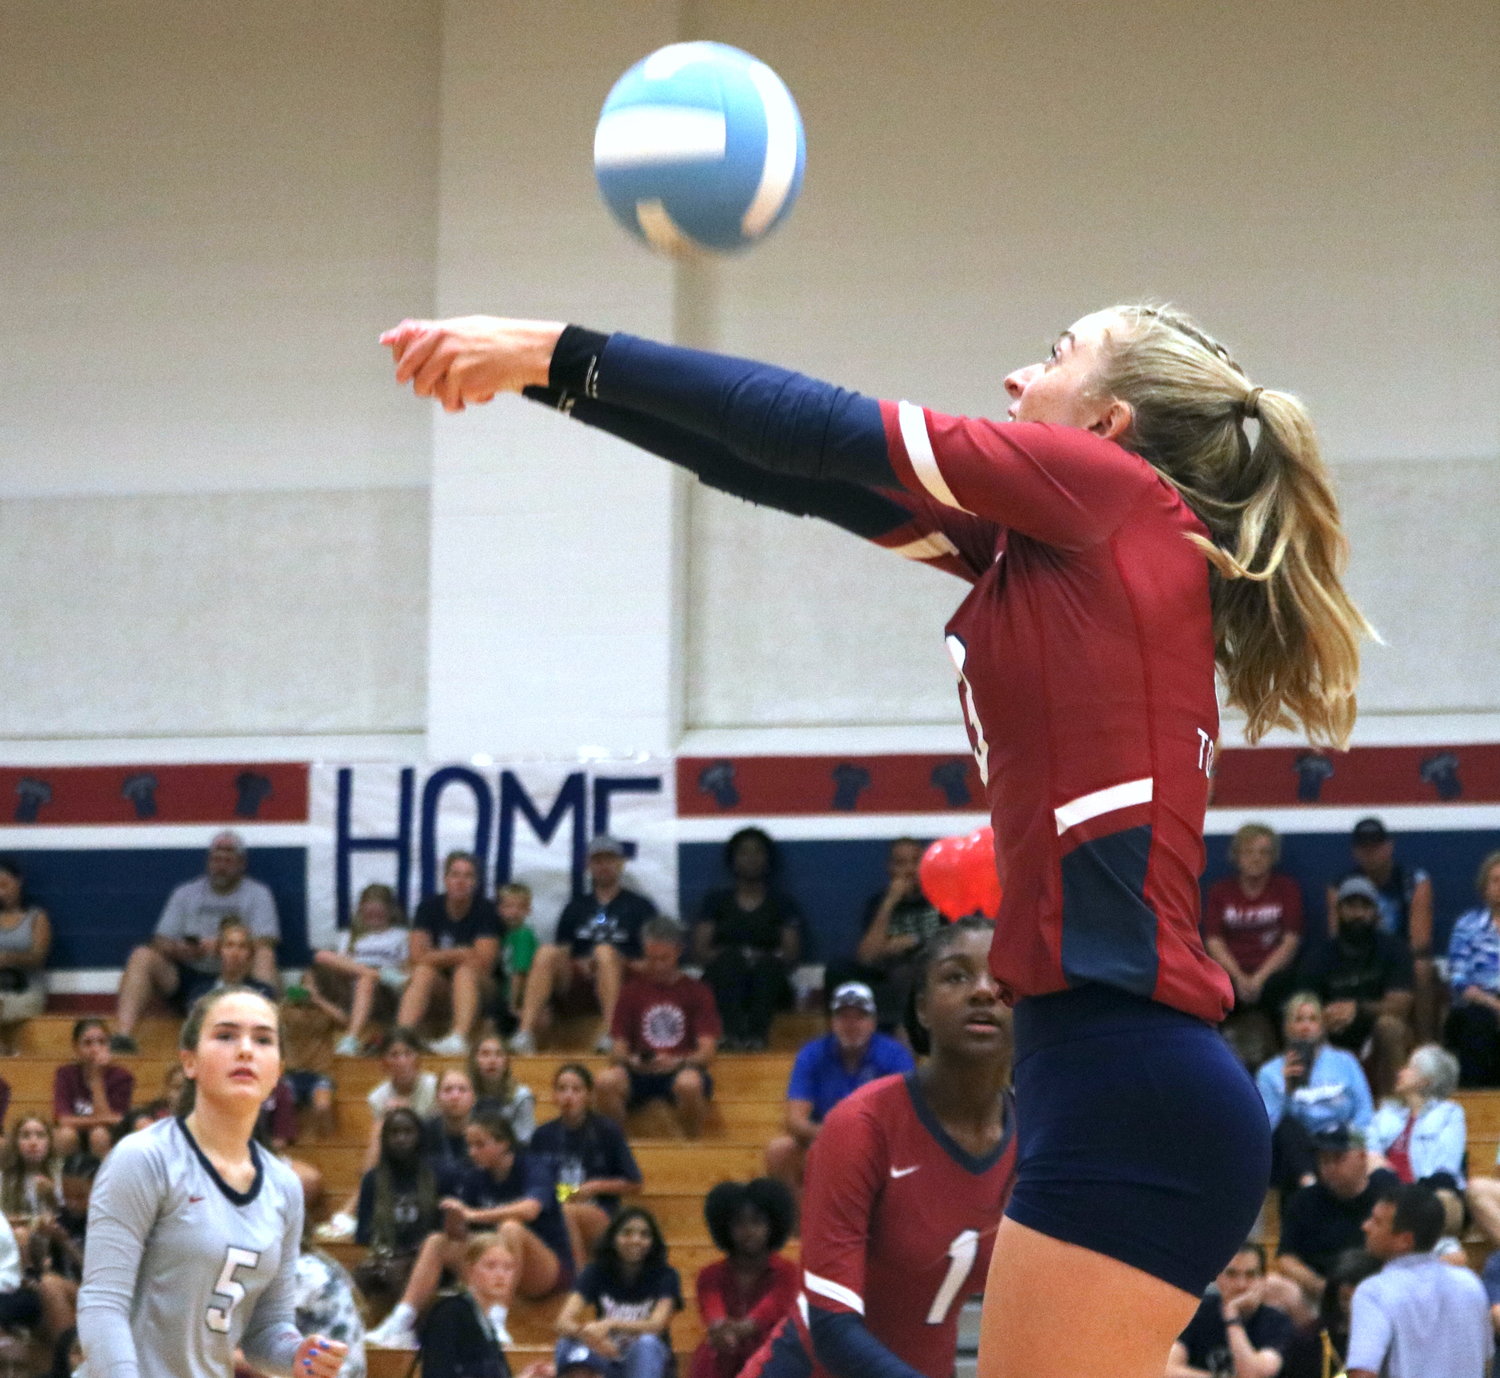 Tompkins’ Presley Powell sets a ball during Tuesday’s match between Tompkins and Katy at the Tompkins gym.